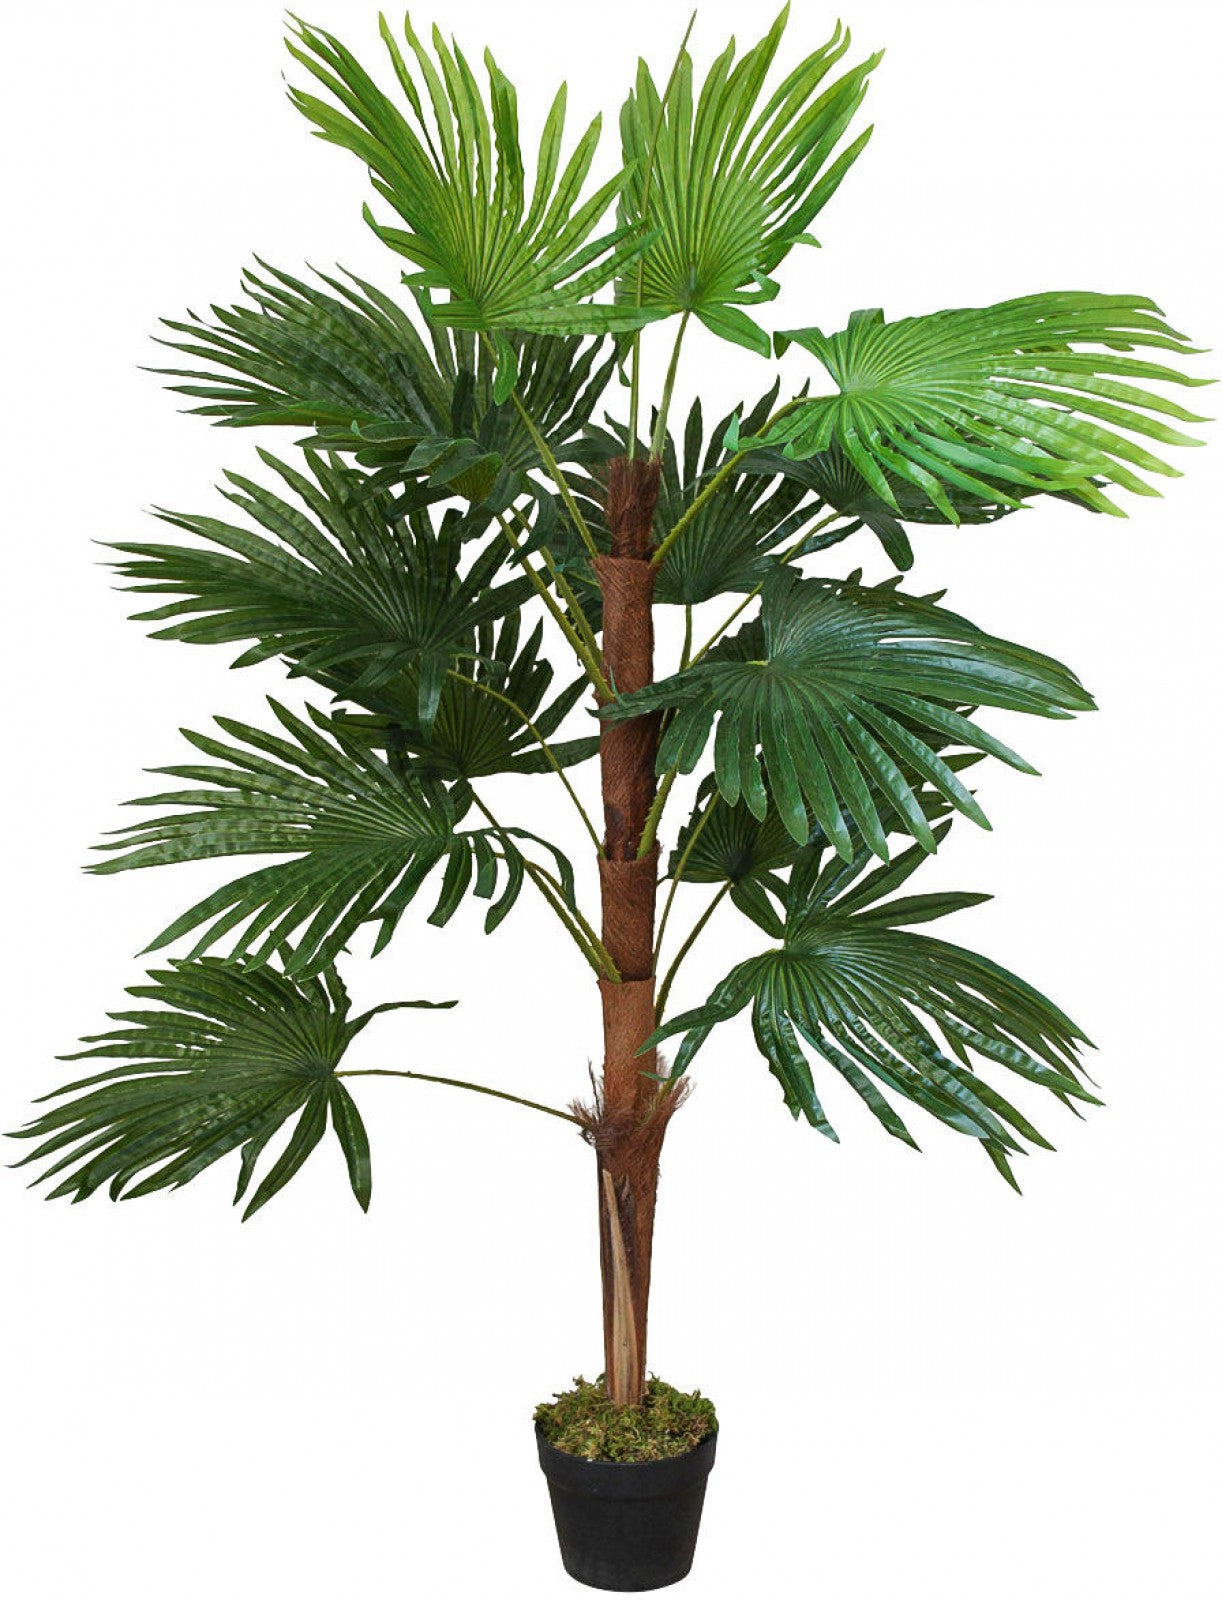 INDOOR PLANT - Fan Palm